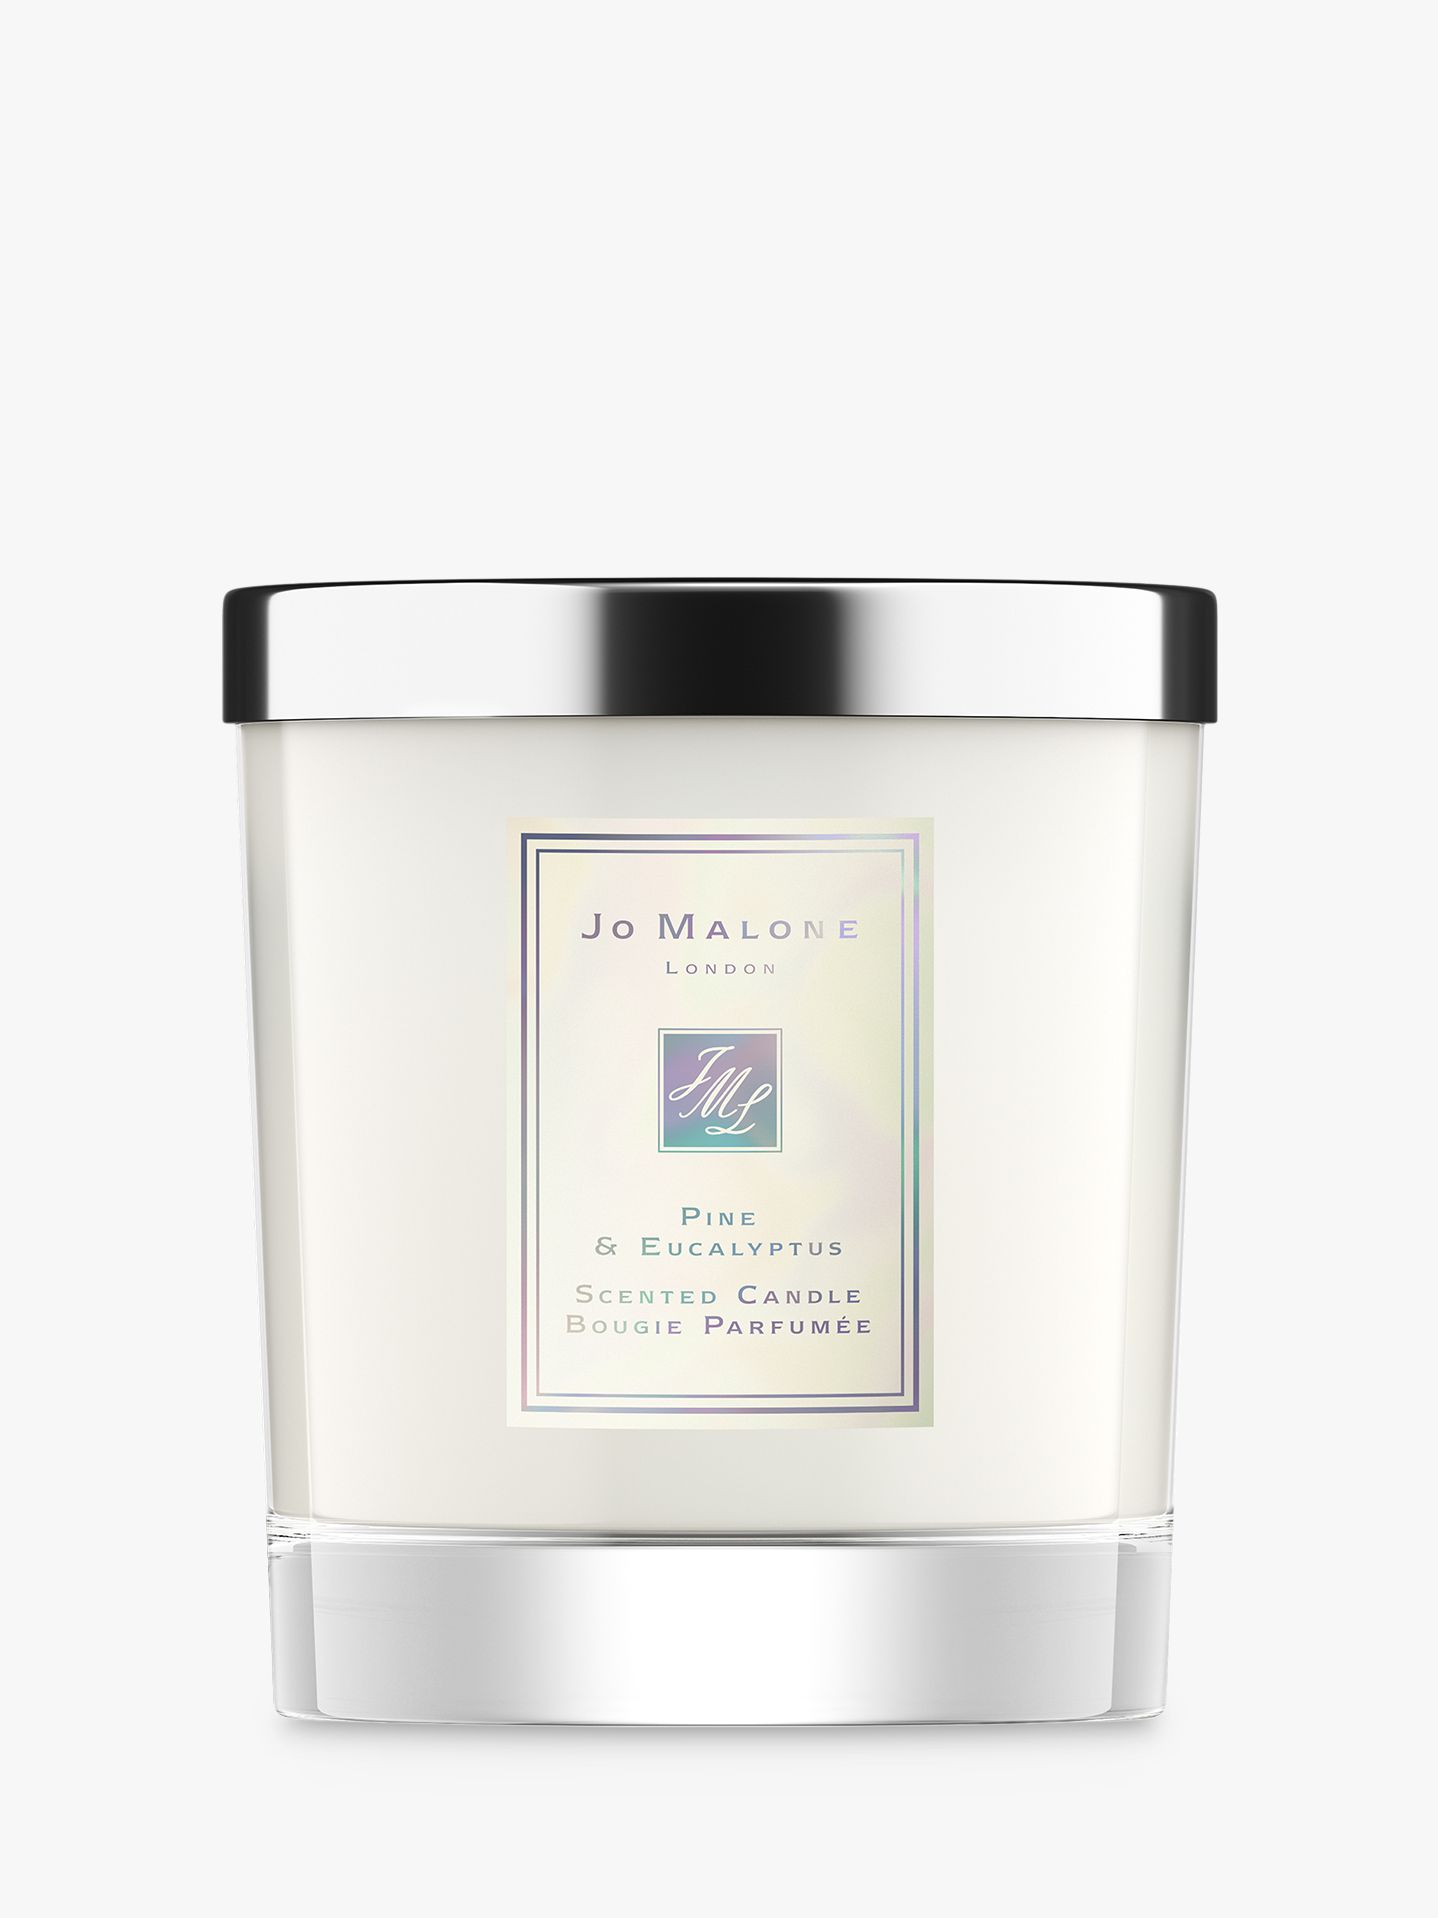 Jo Malone London Pine & Eucalyptus Home Scented Candle, 200g